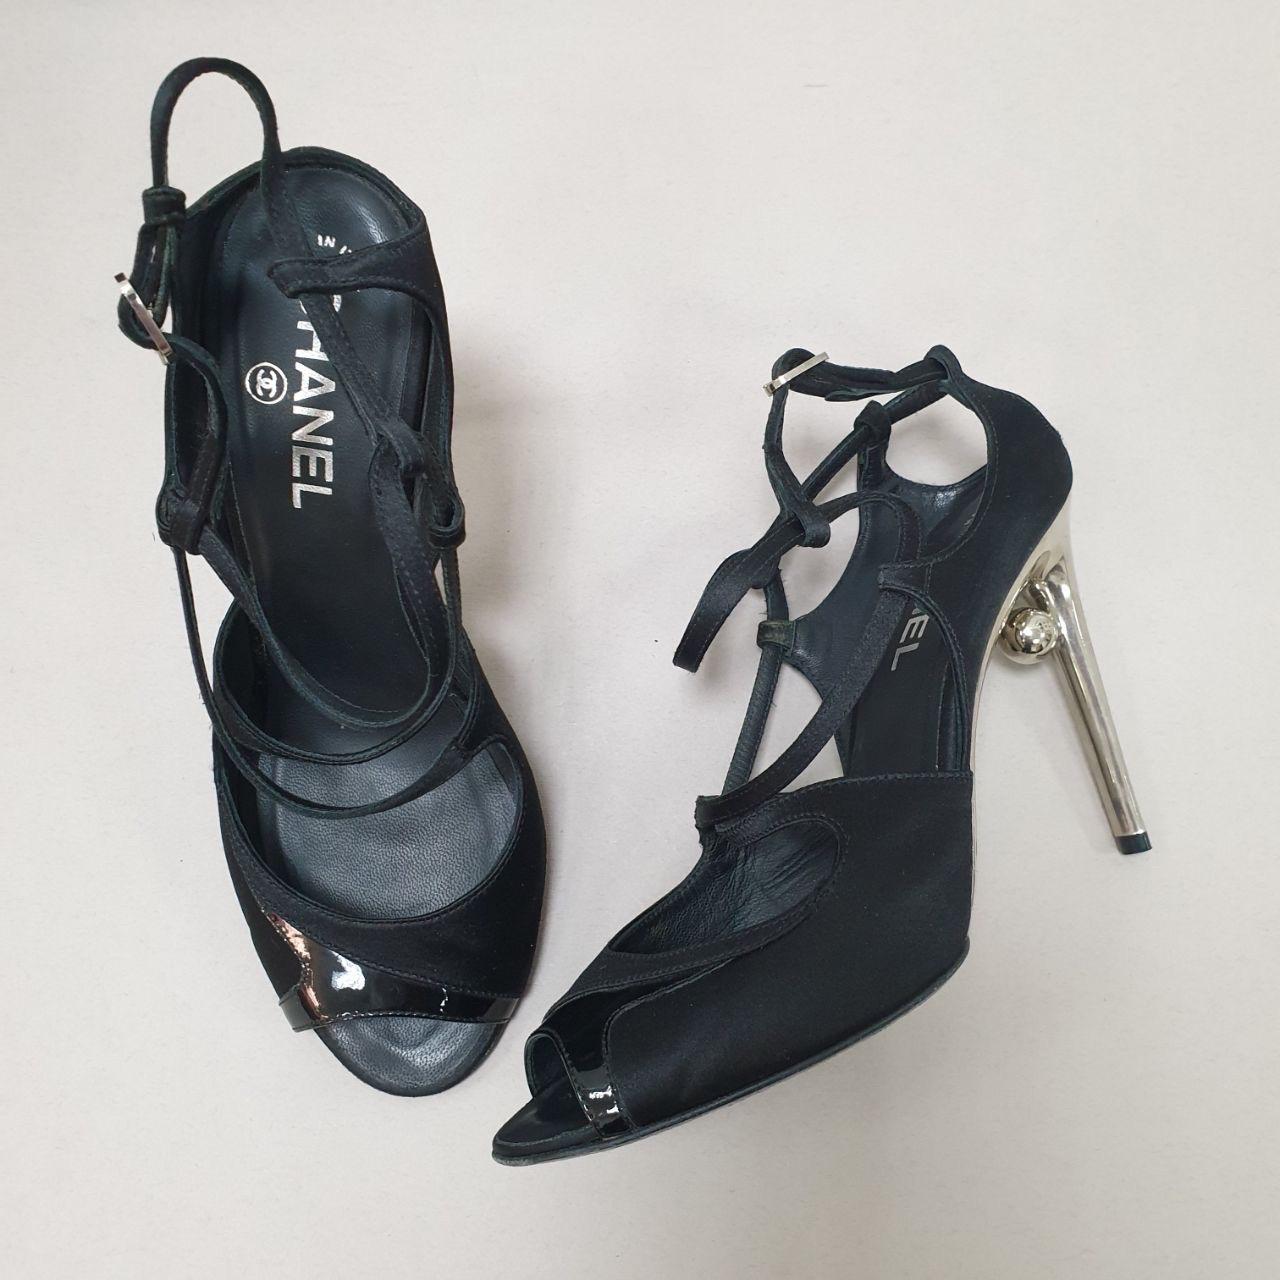     Chanel Vintage Slingback Sandals
    From the Fall 2008 Collection by Karl Lagerfeld
    Black Satin
    Interlocking CC Logo & Faux Pearl Accents
    Beaded Accents
    Multistrap & Buckle Closure at Ankles


Very good condition. Signs of wear